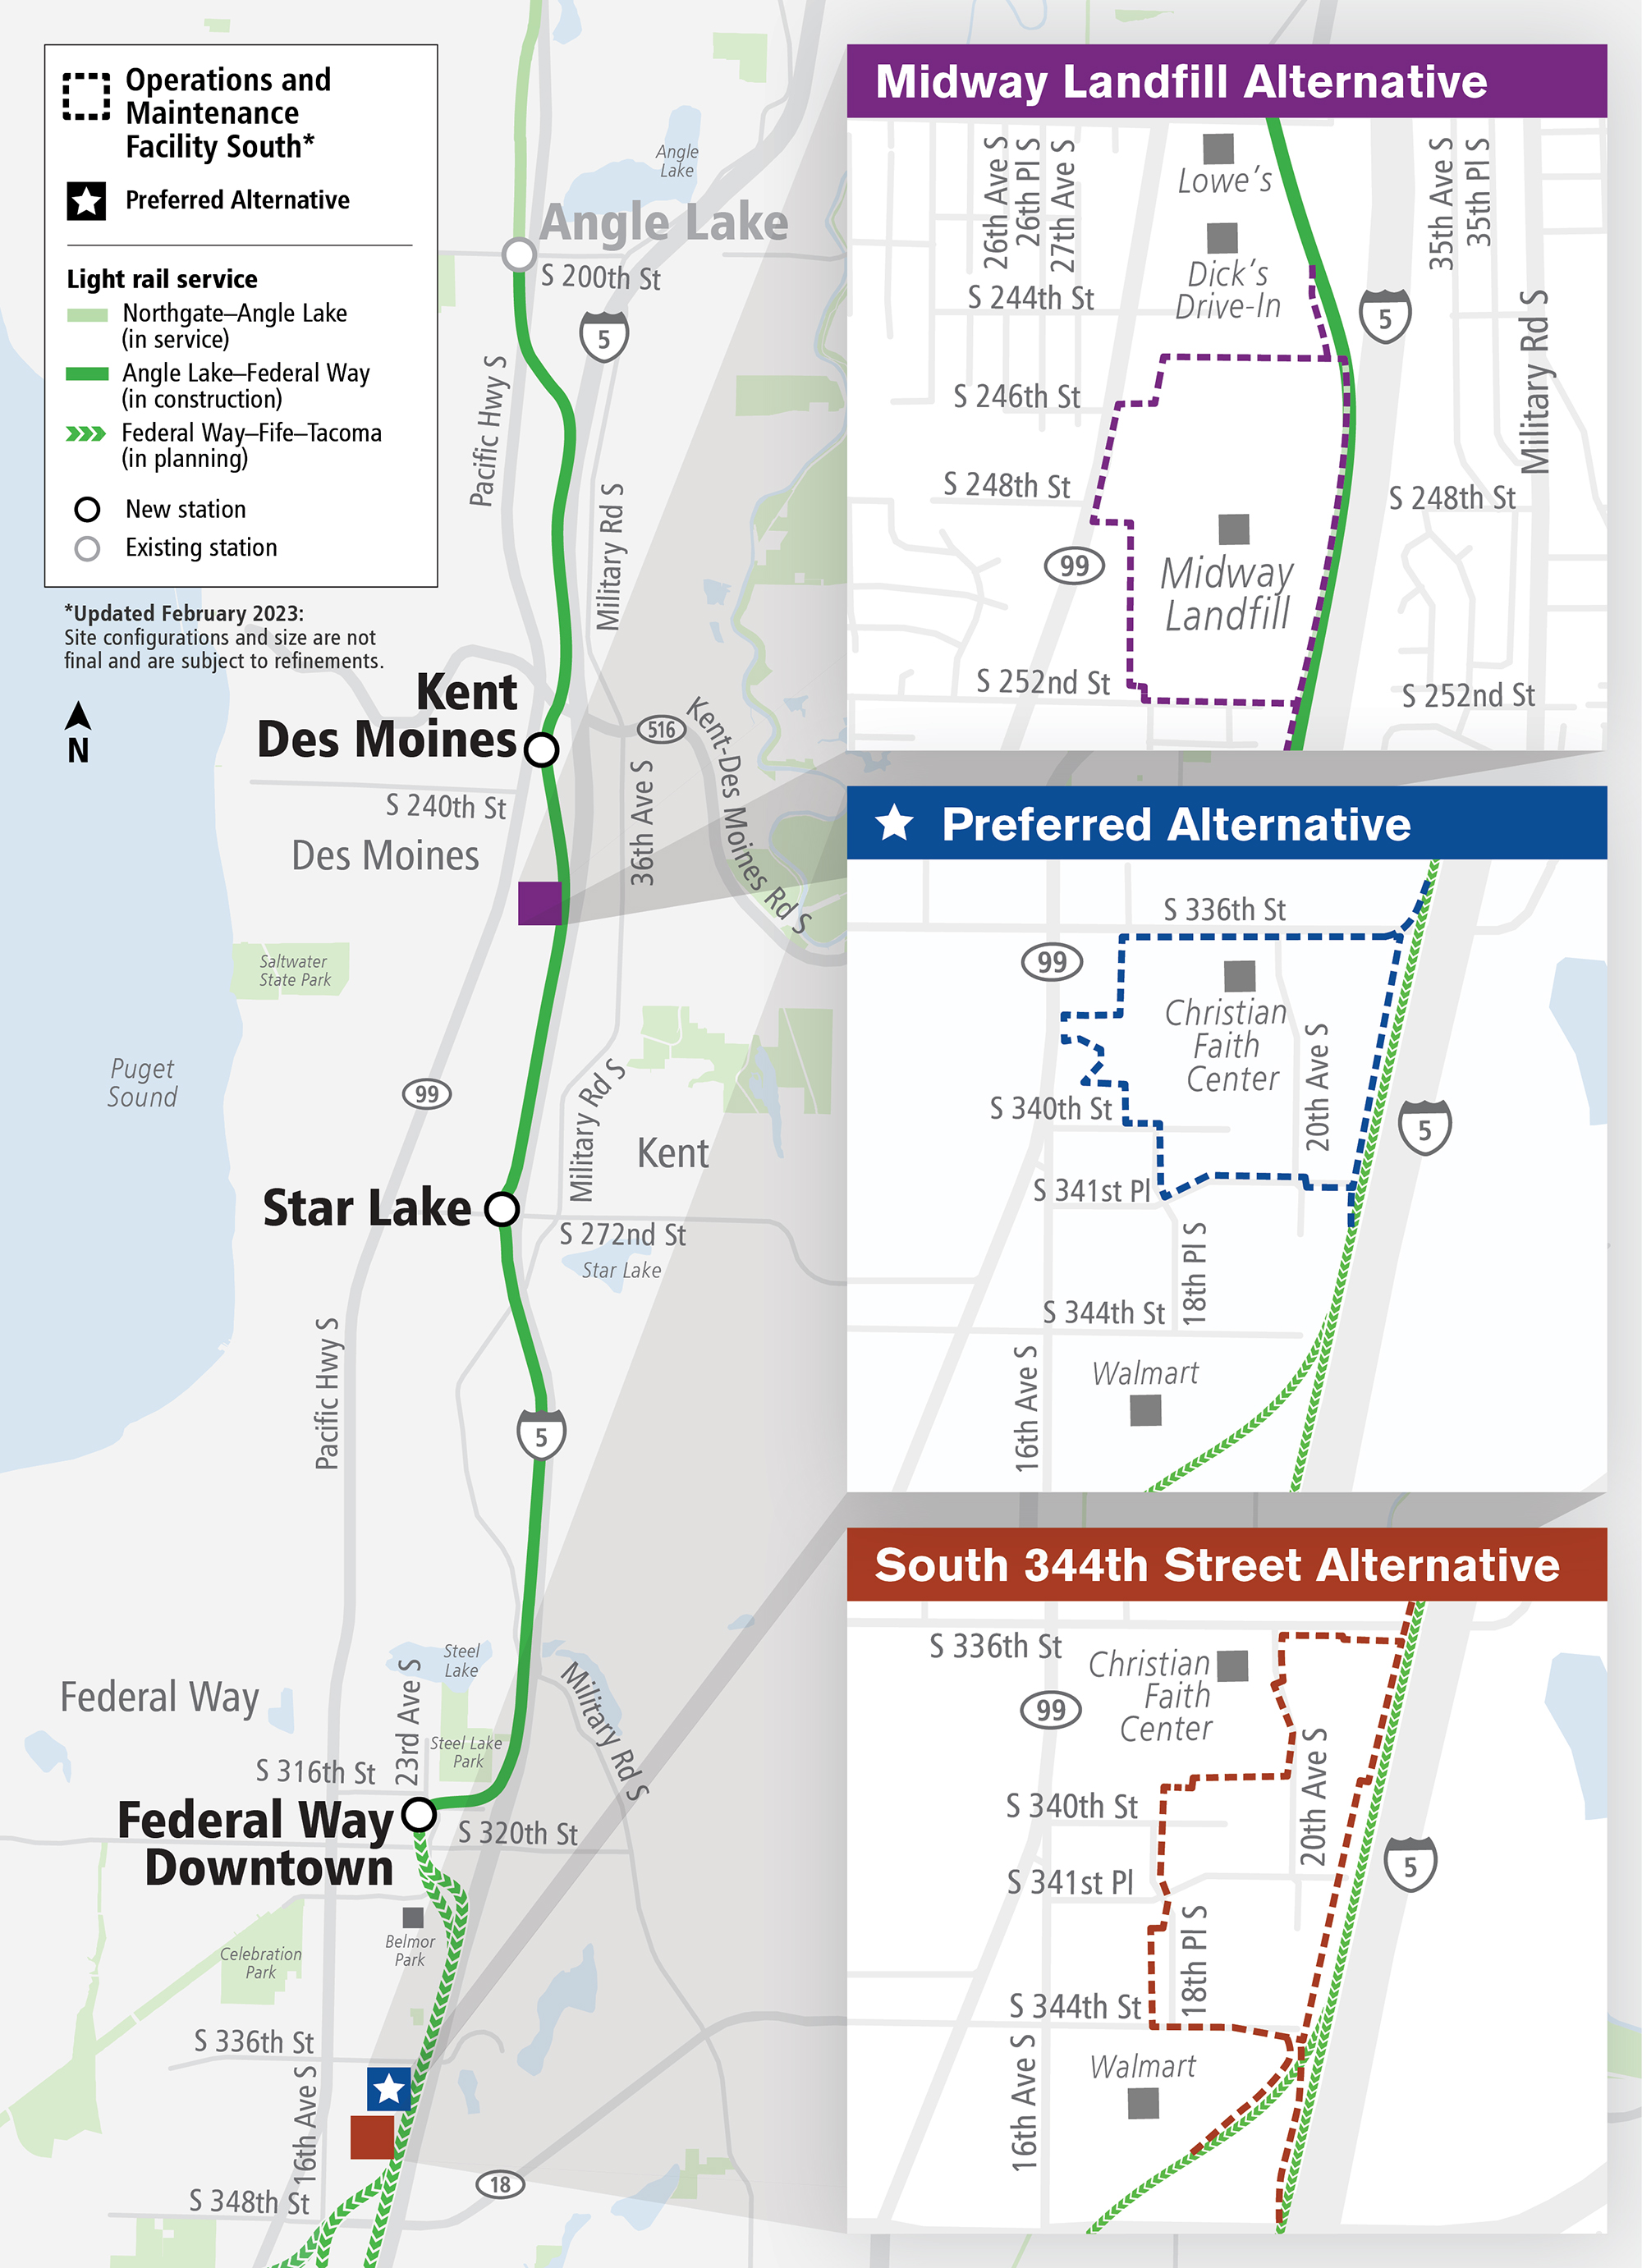 Overview map of the three alternatives for the Operations and Maintenance Facility South. The preferred alternative is located near 336th Street in Federal Way. We are also studying a 344th Street alternative in Federal way and the Midway Landfill alternative in Kent.